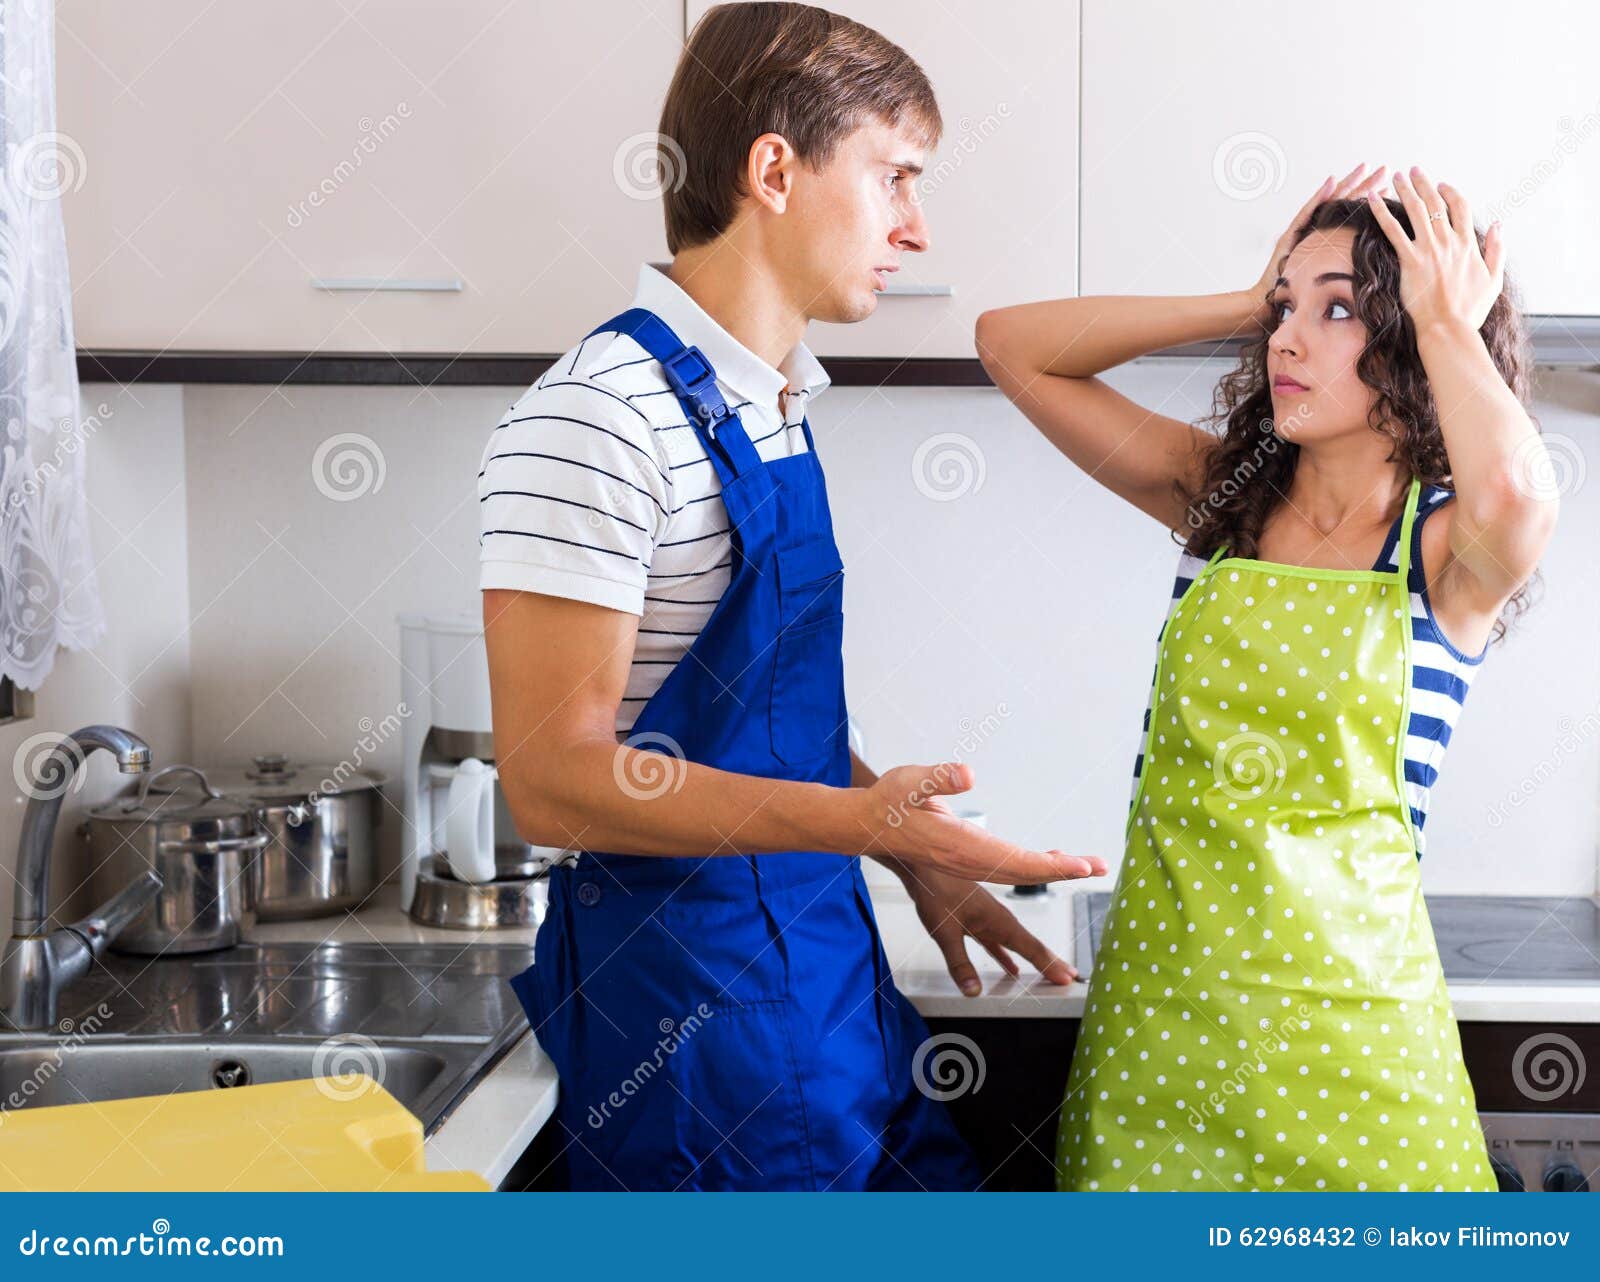 housewife and the plumber Adult Pics Hq